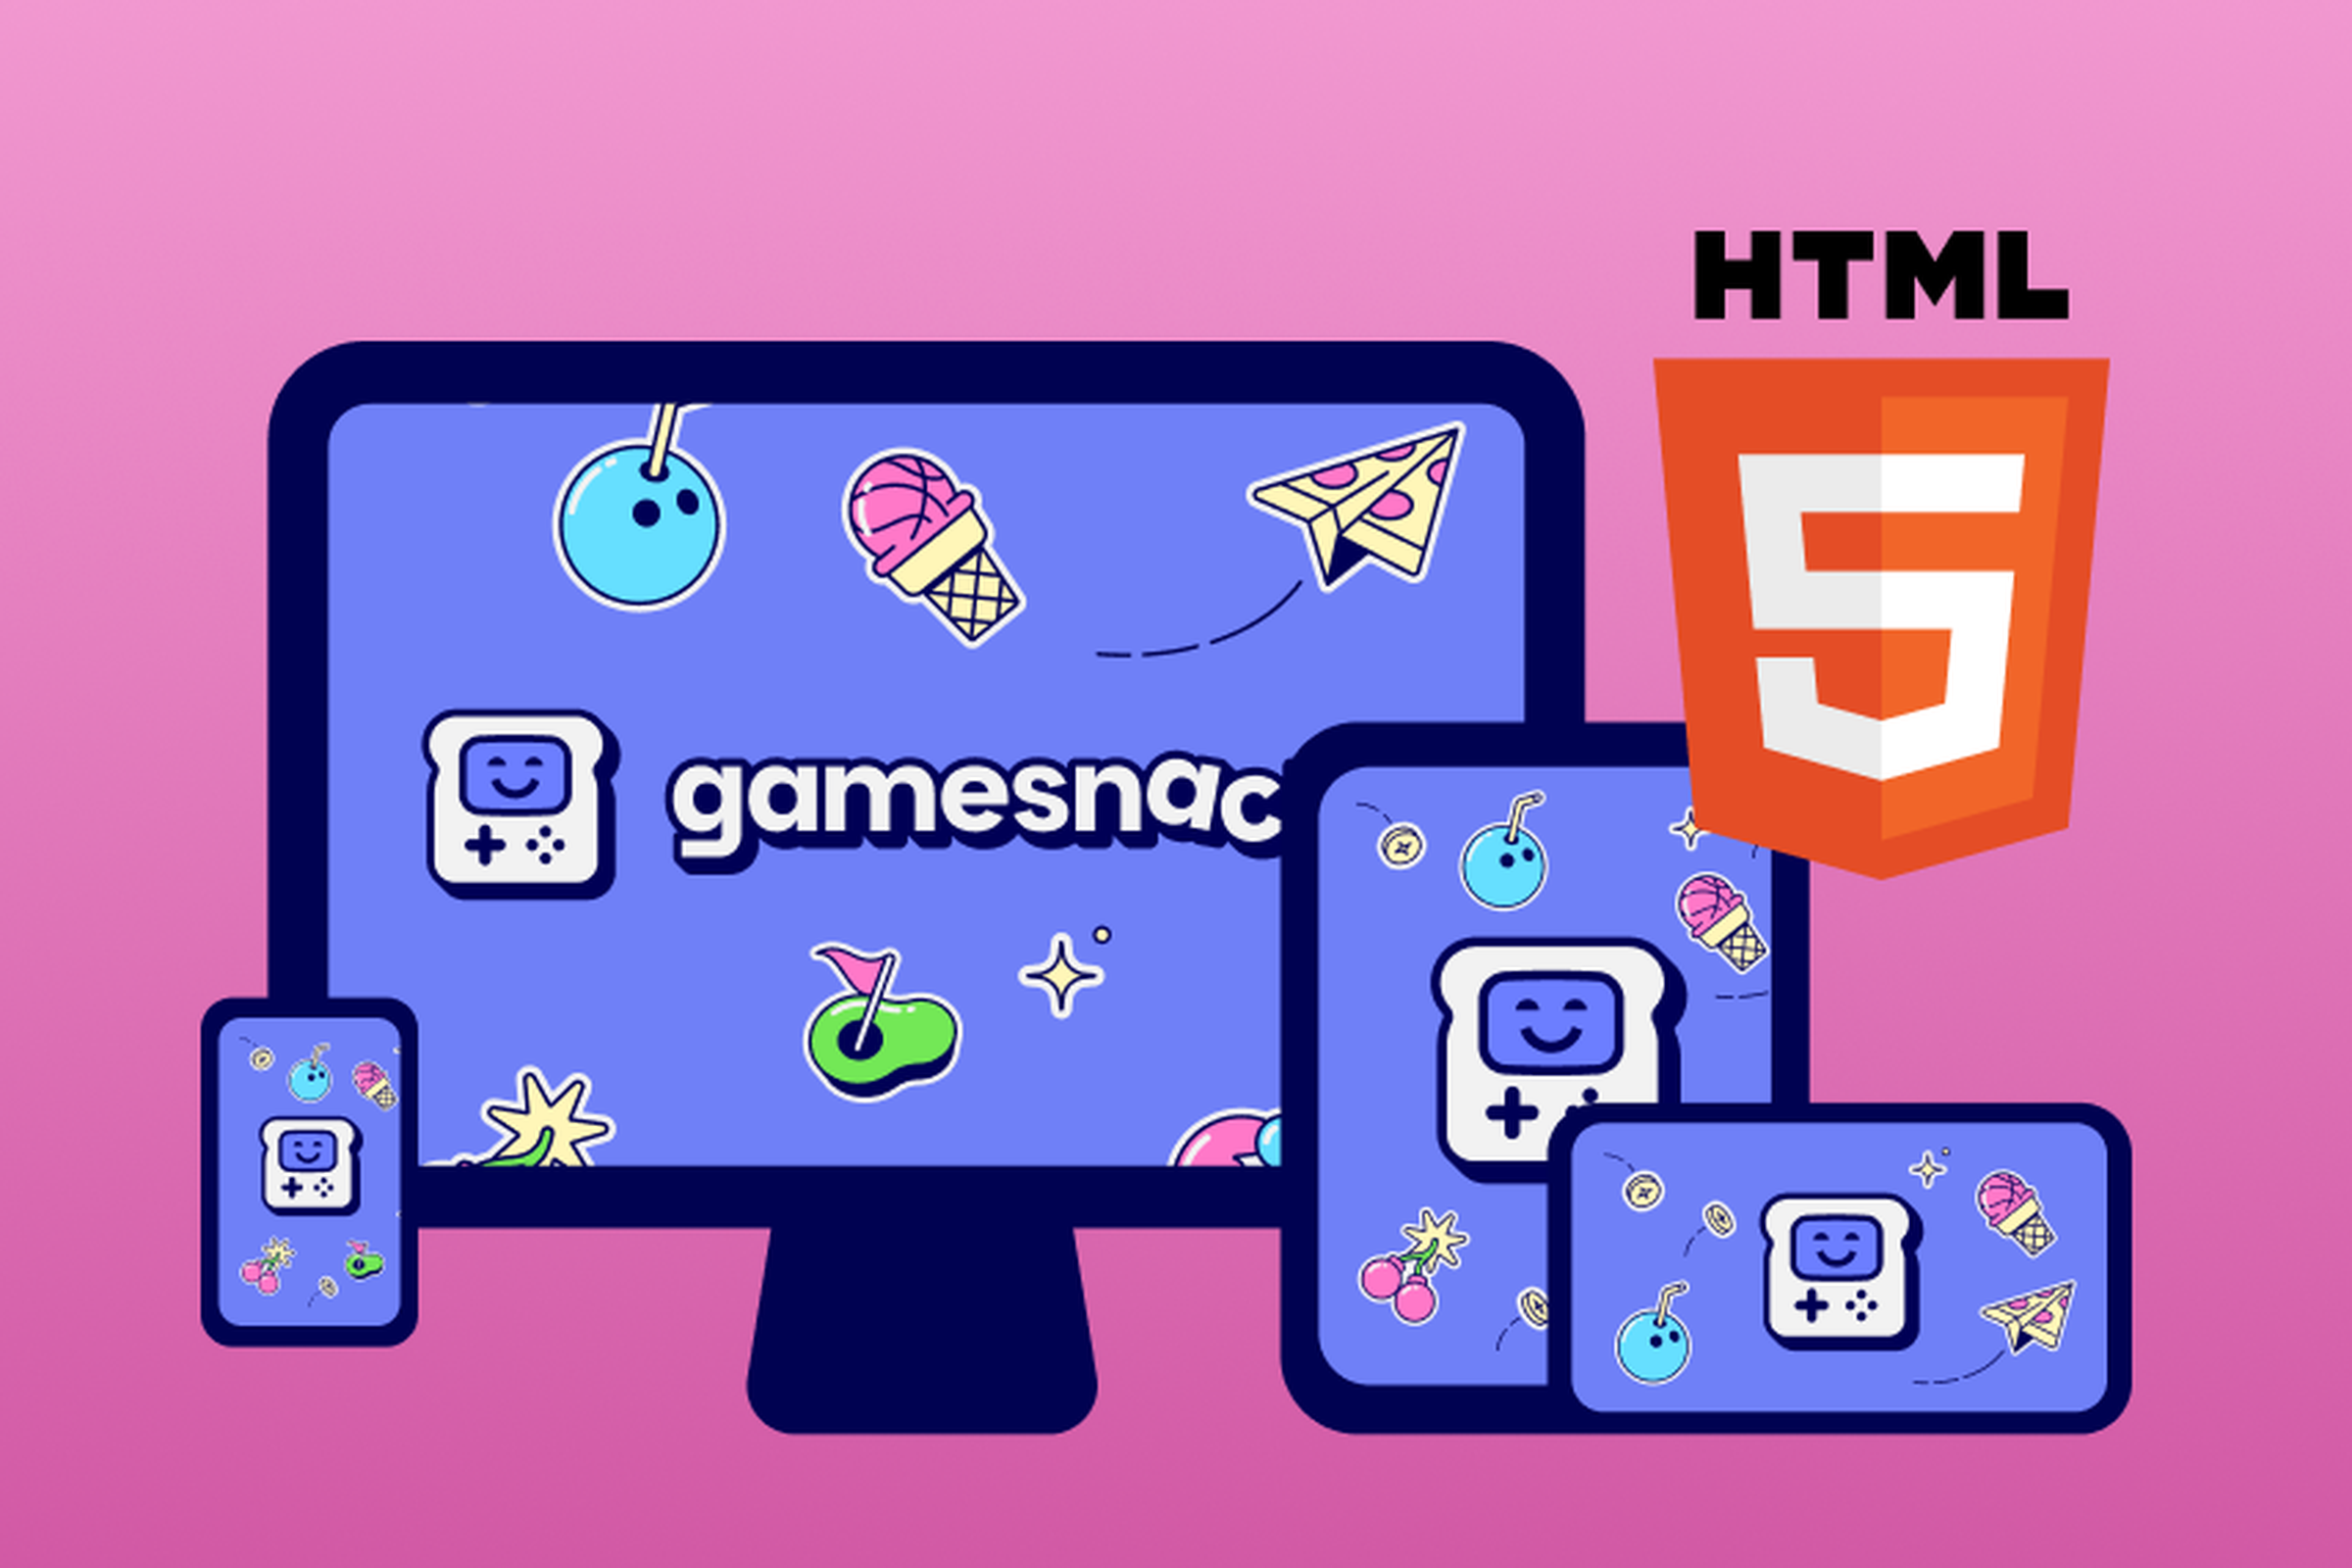 Html games. Html5 games. Play html games. Android auto игры Gamesnacks.